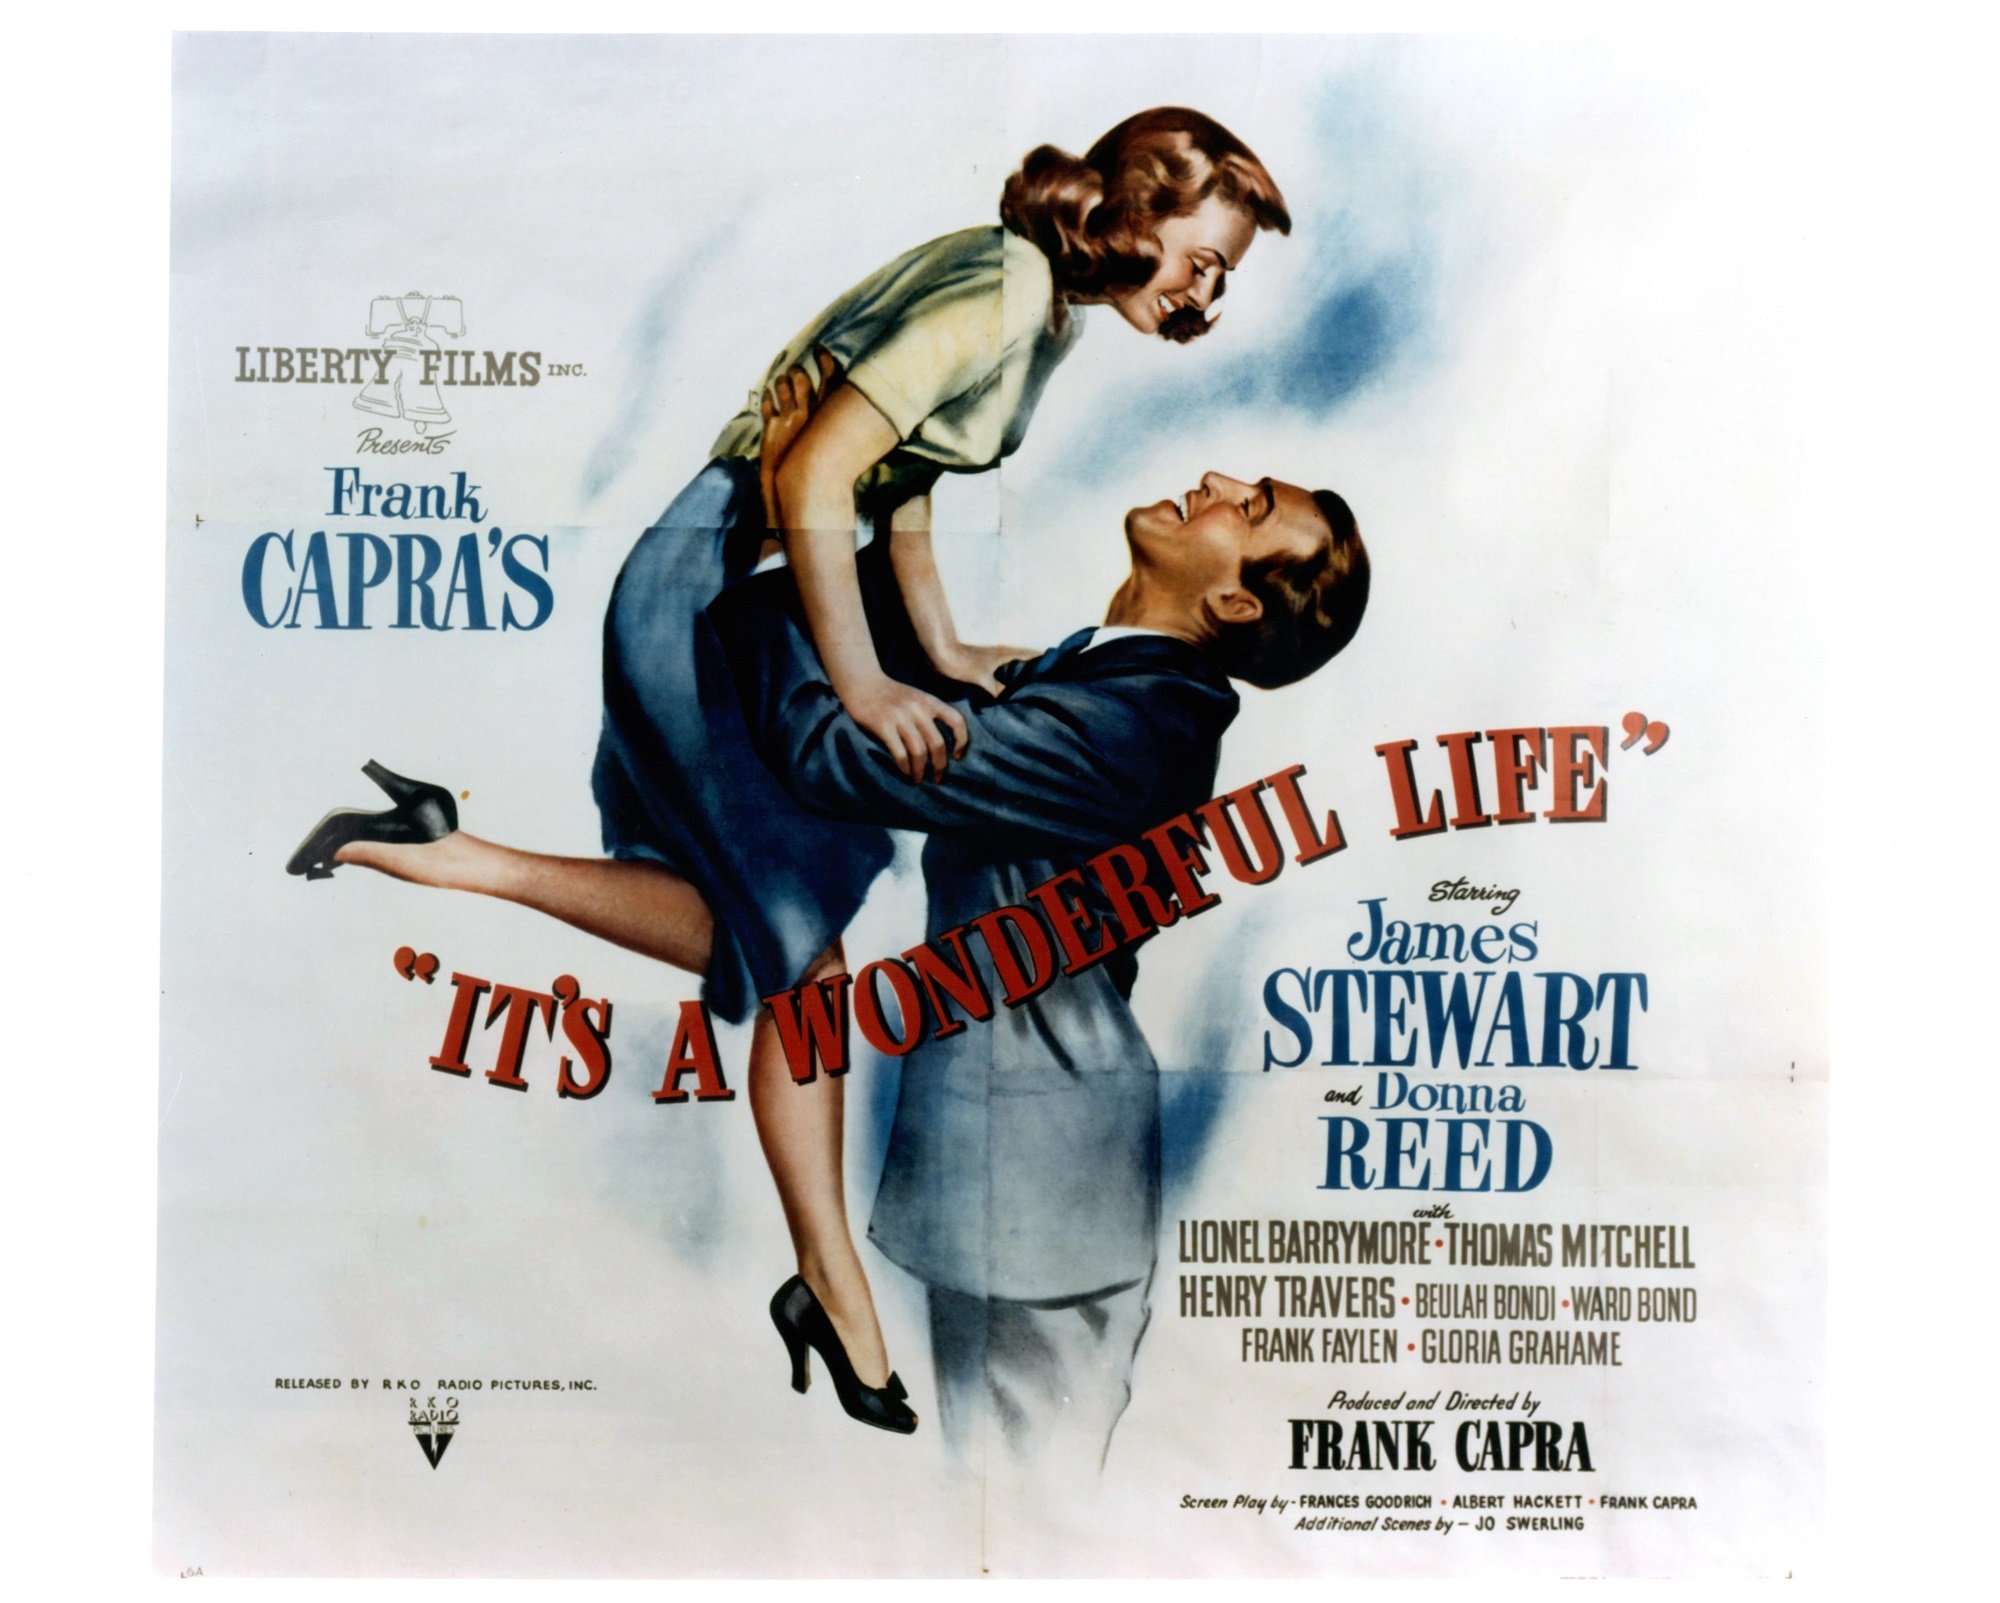 Donna Reed is lifted by James Stewart in movie art for the film It's A Wonderful Life